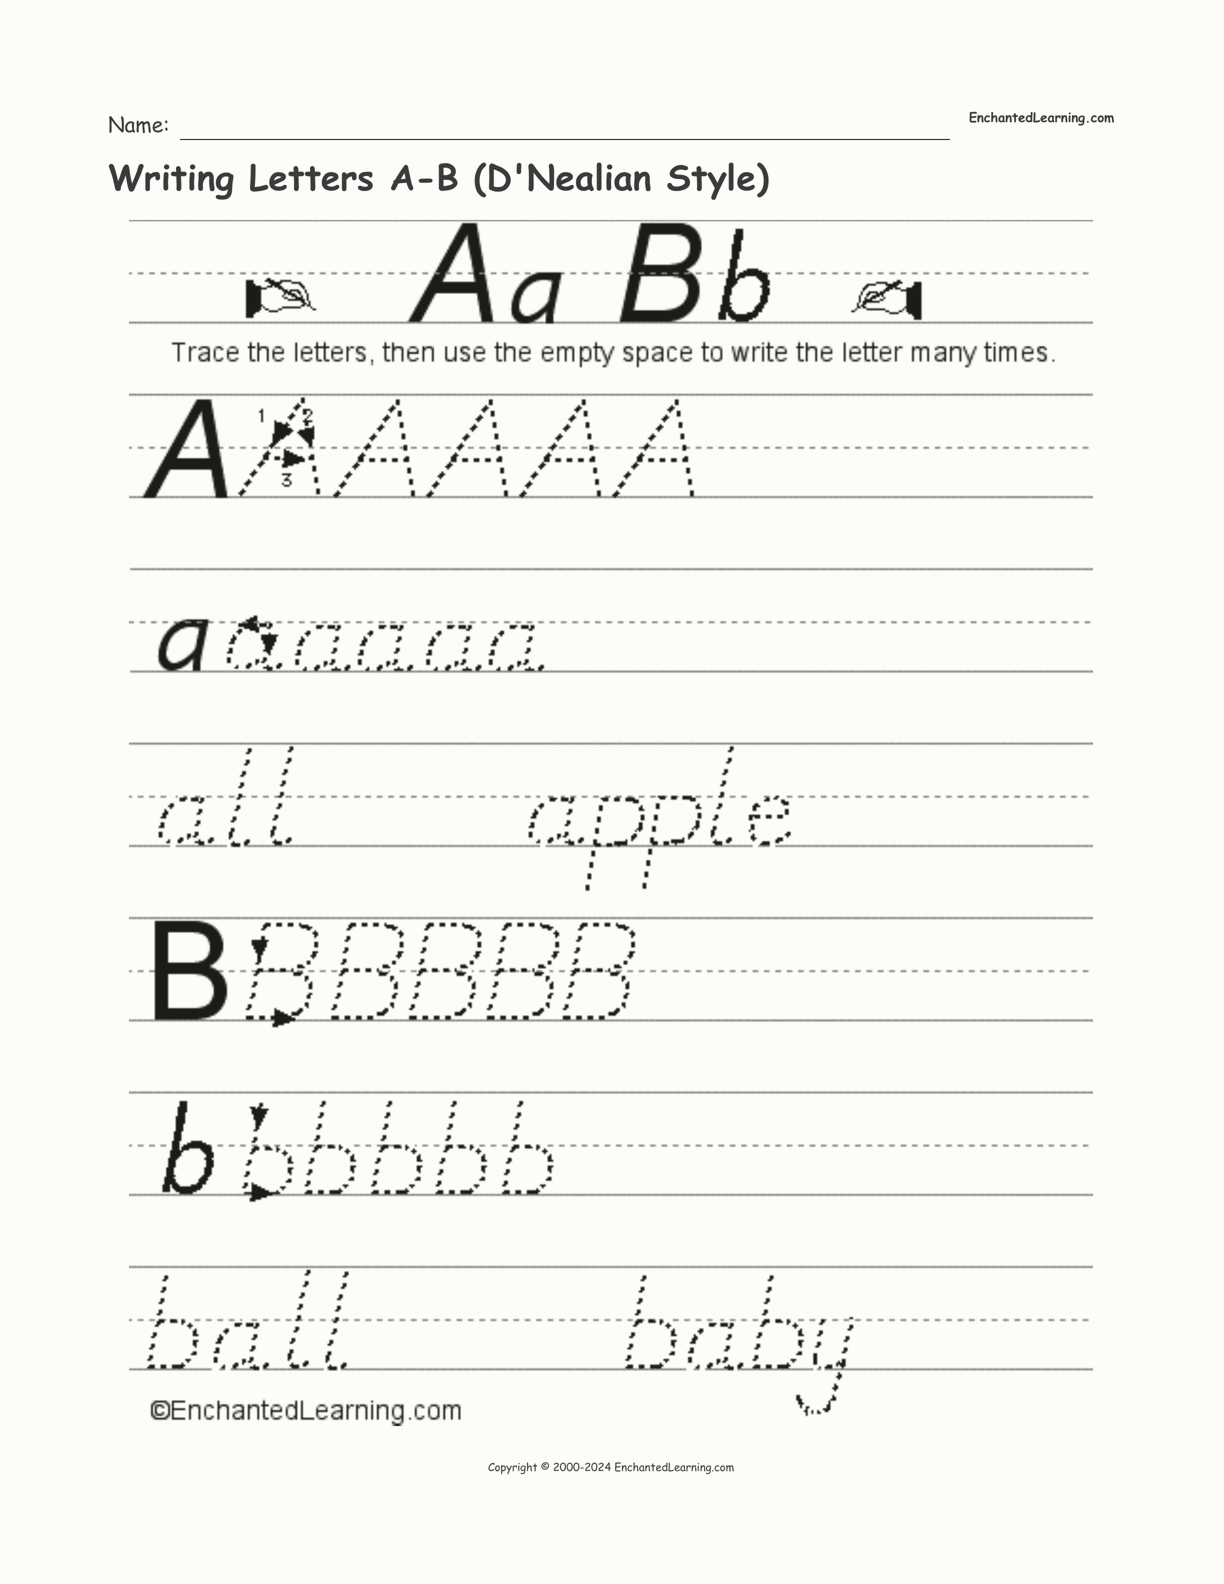 Writing Letters A-B (D'Nealian Style) interactive worksheet page 1